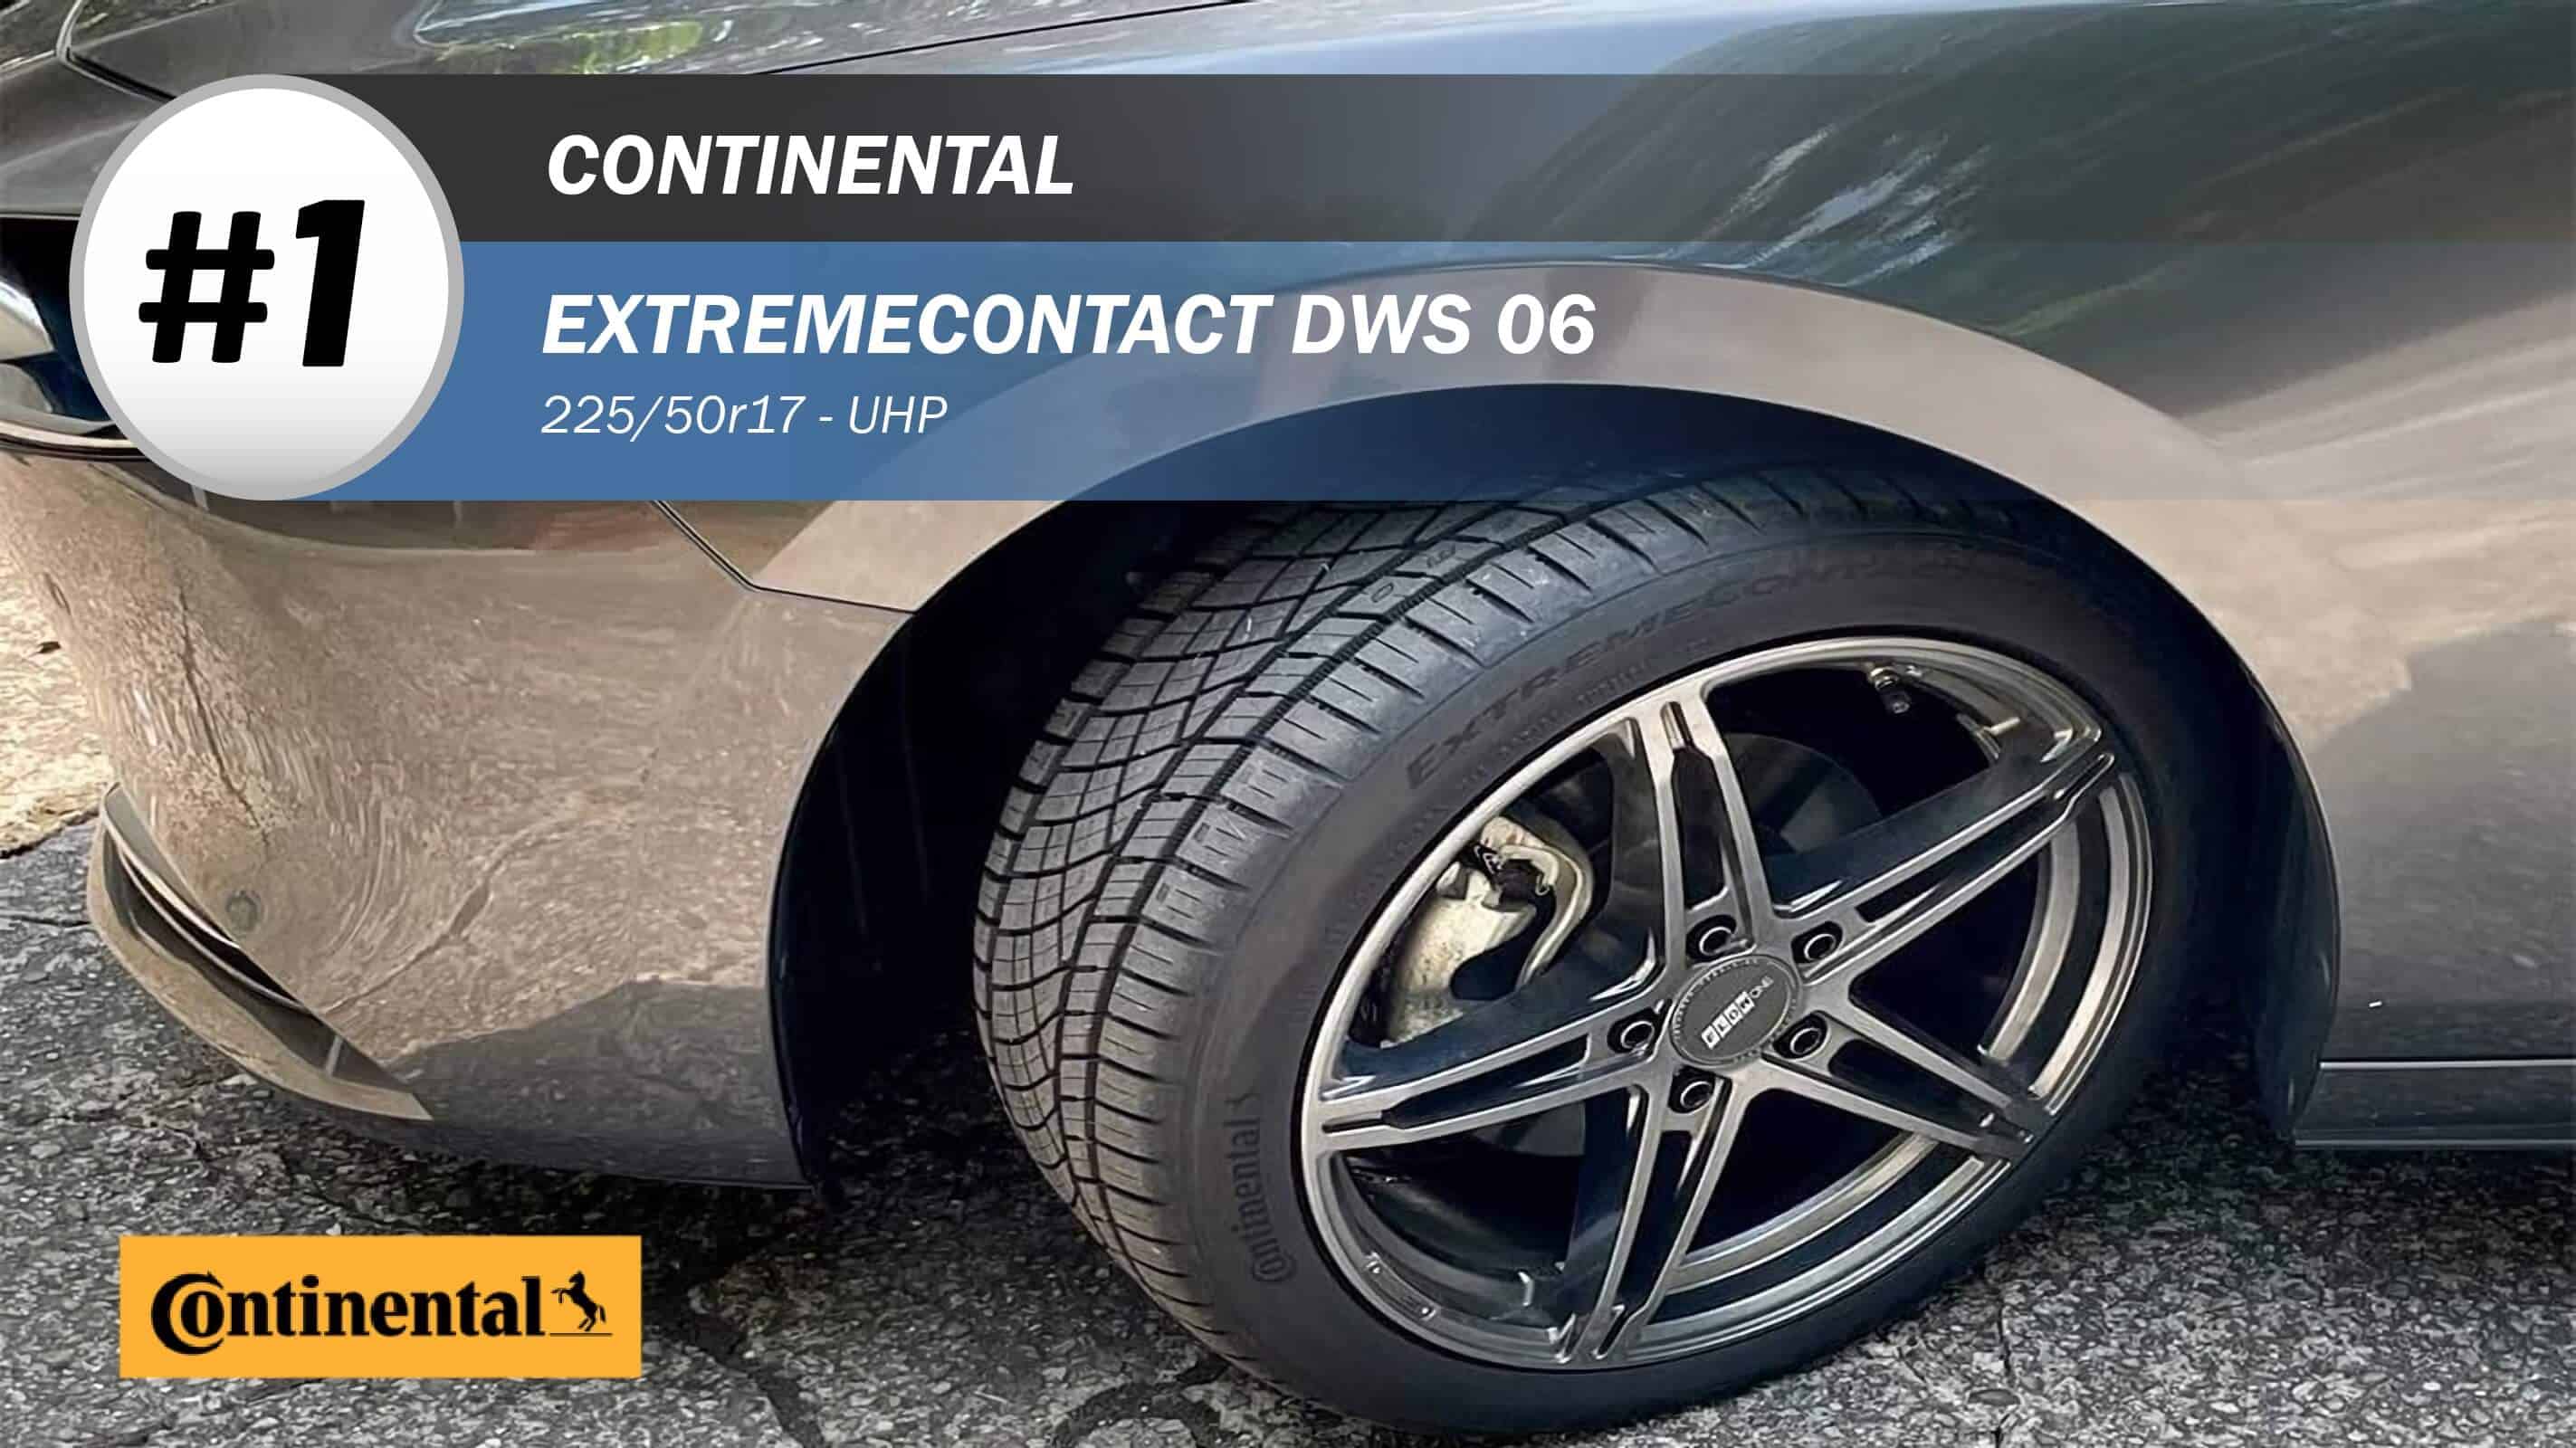 Top #1 UHP Tires: Continental ExtremeContact DWS 06 Plus – 225/50R17